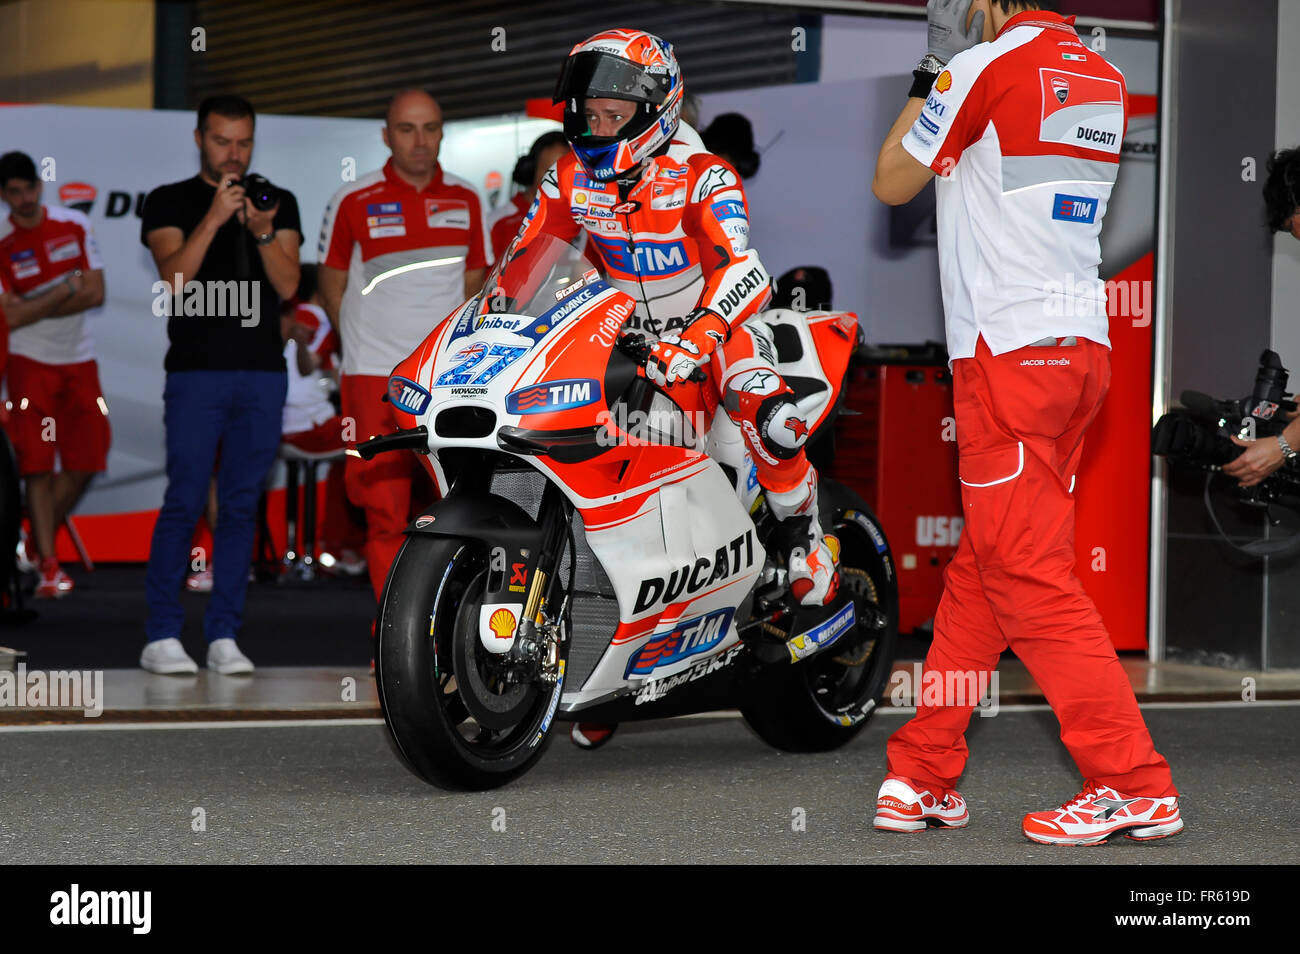 Ducati team test rider Casey Stoner of Australia during test day at Losail circuit (Photo by Gaetano Piazzolla / Pacific Press Stock Photo